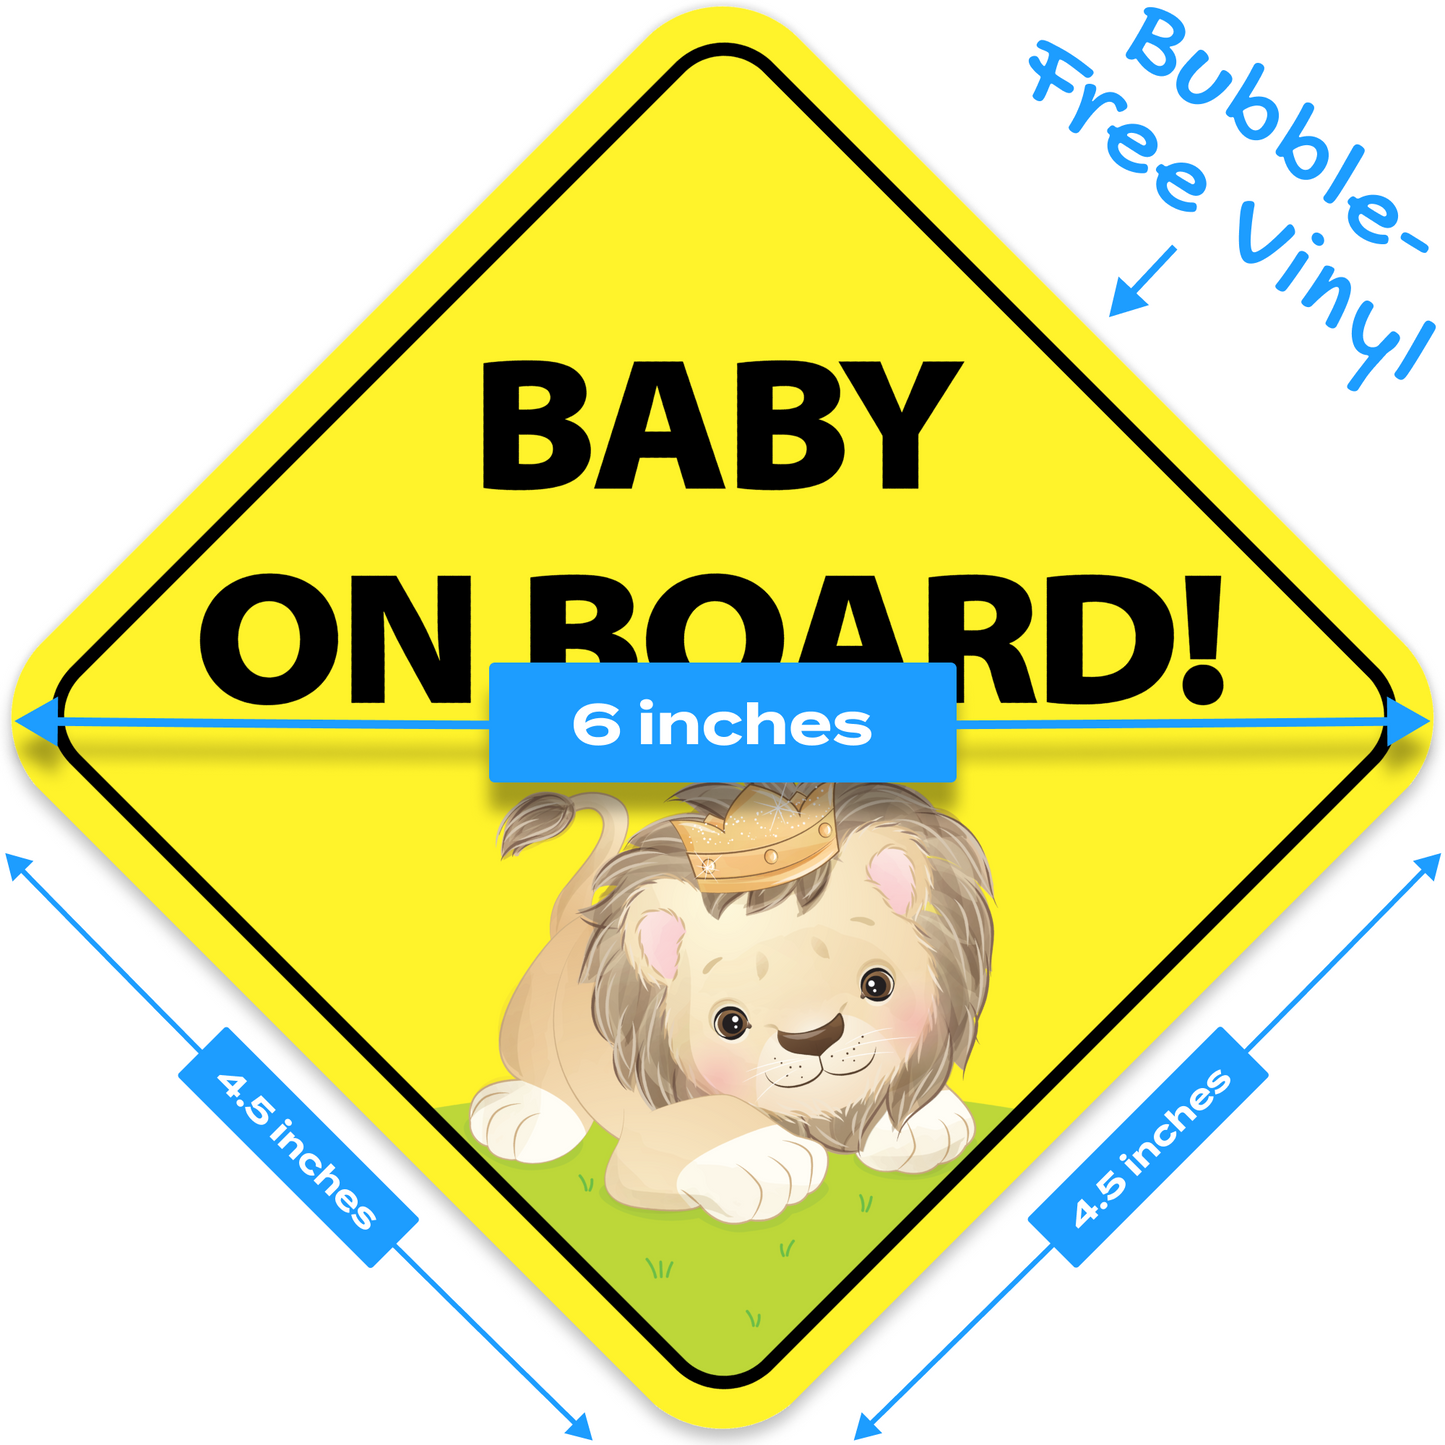 Baby On Board Baby Lion King 4